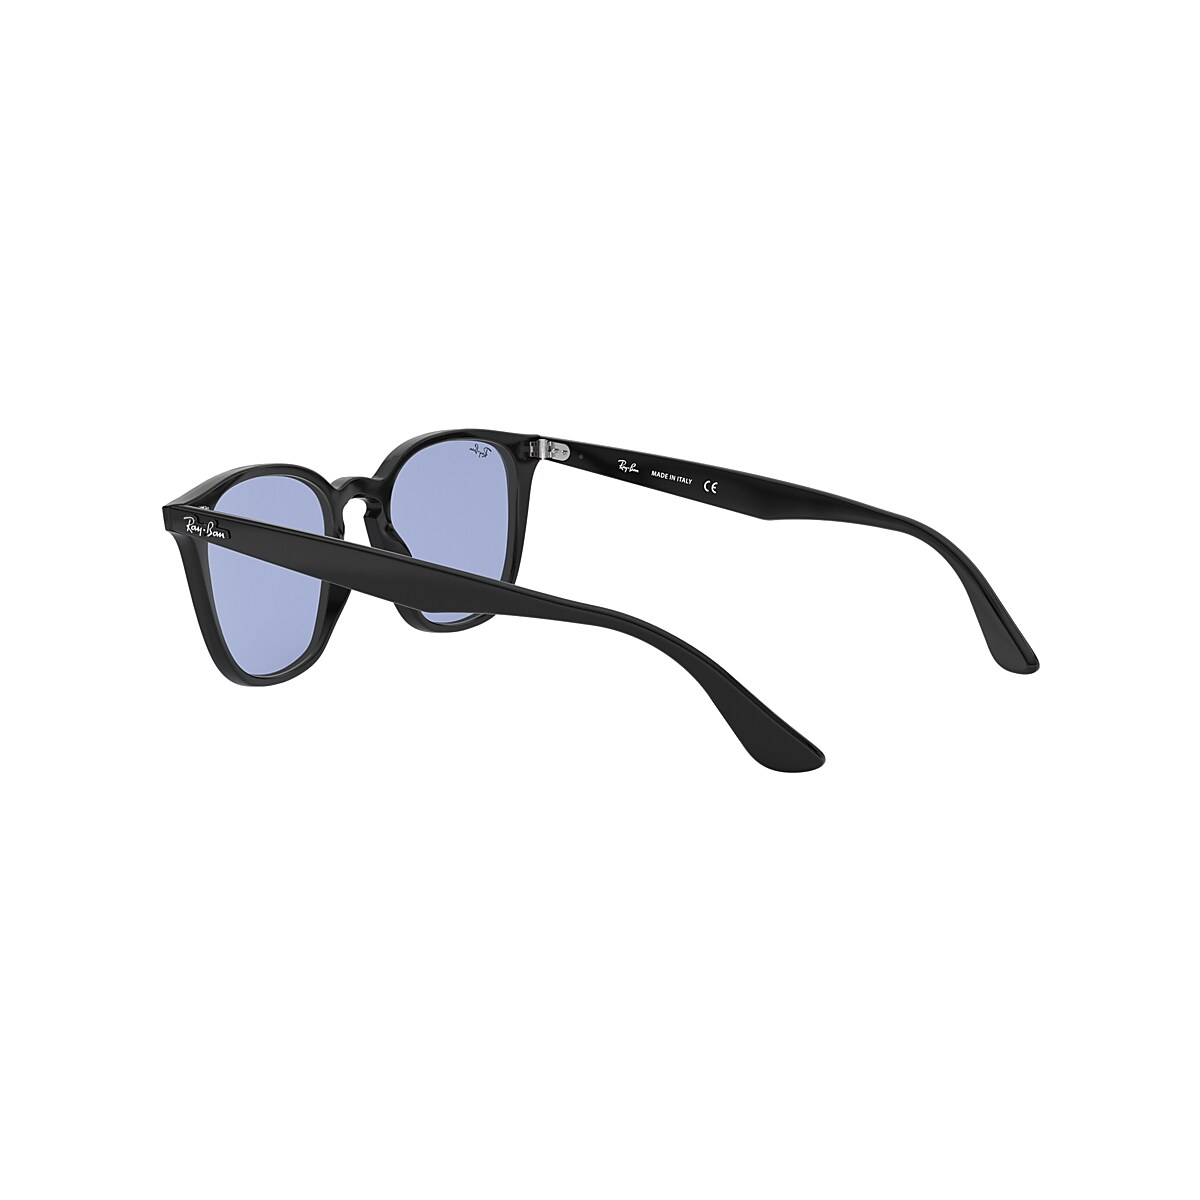 RB4258 WASHED LENSES Sunglasses in Black and Blue - RB4258F | Ray